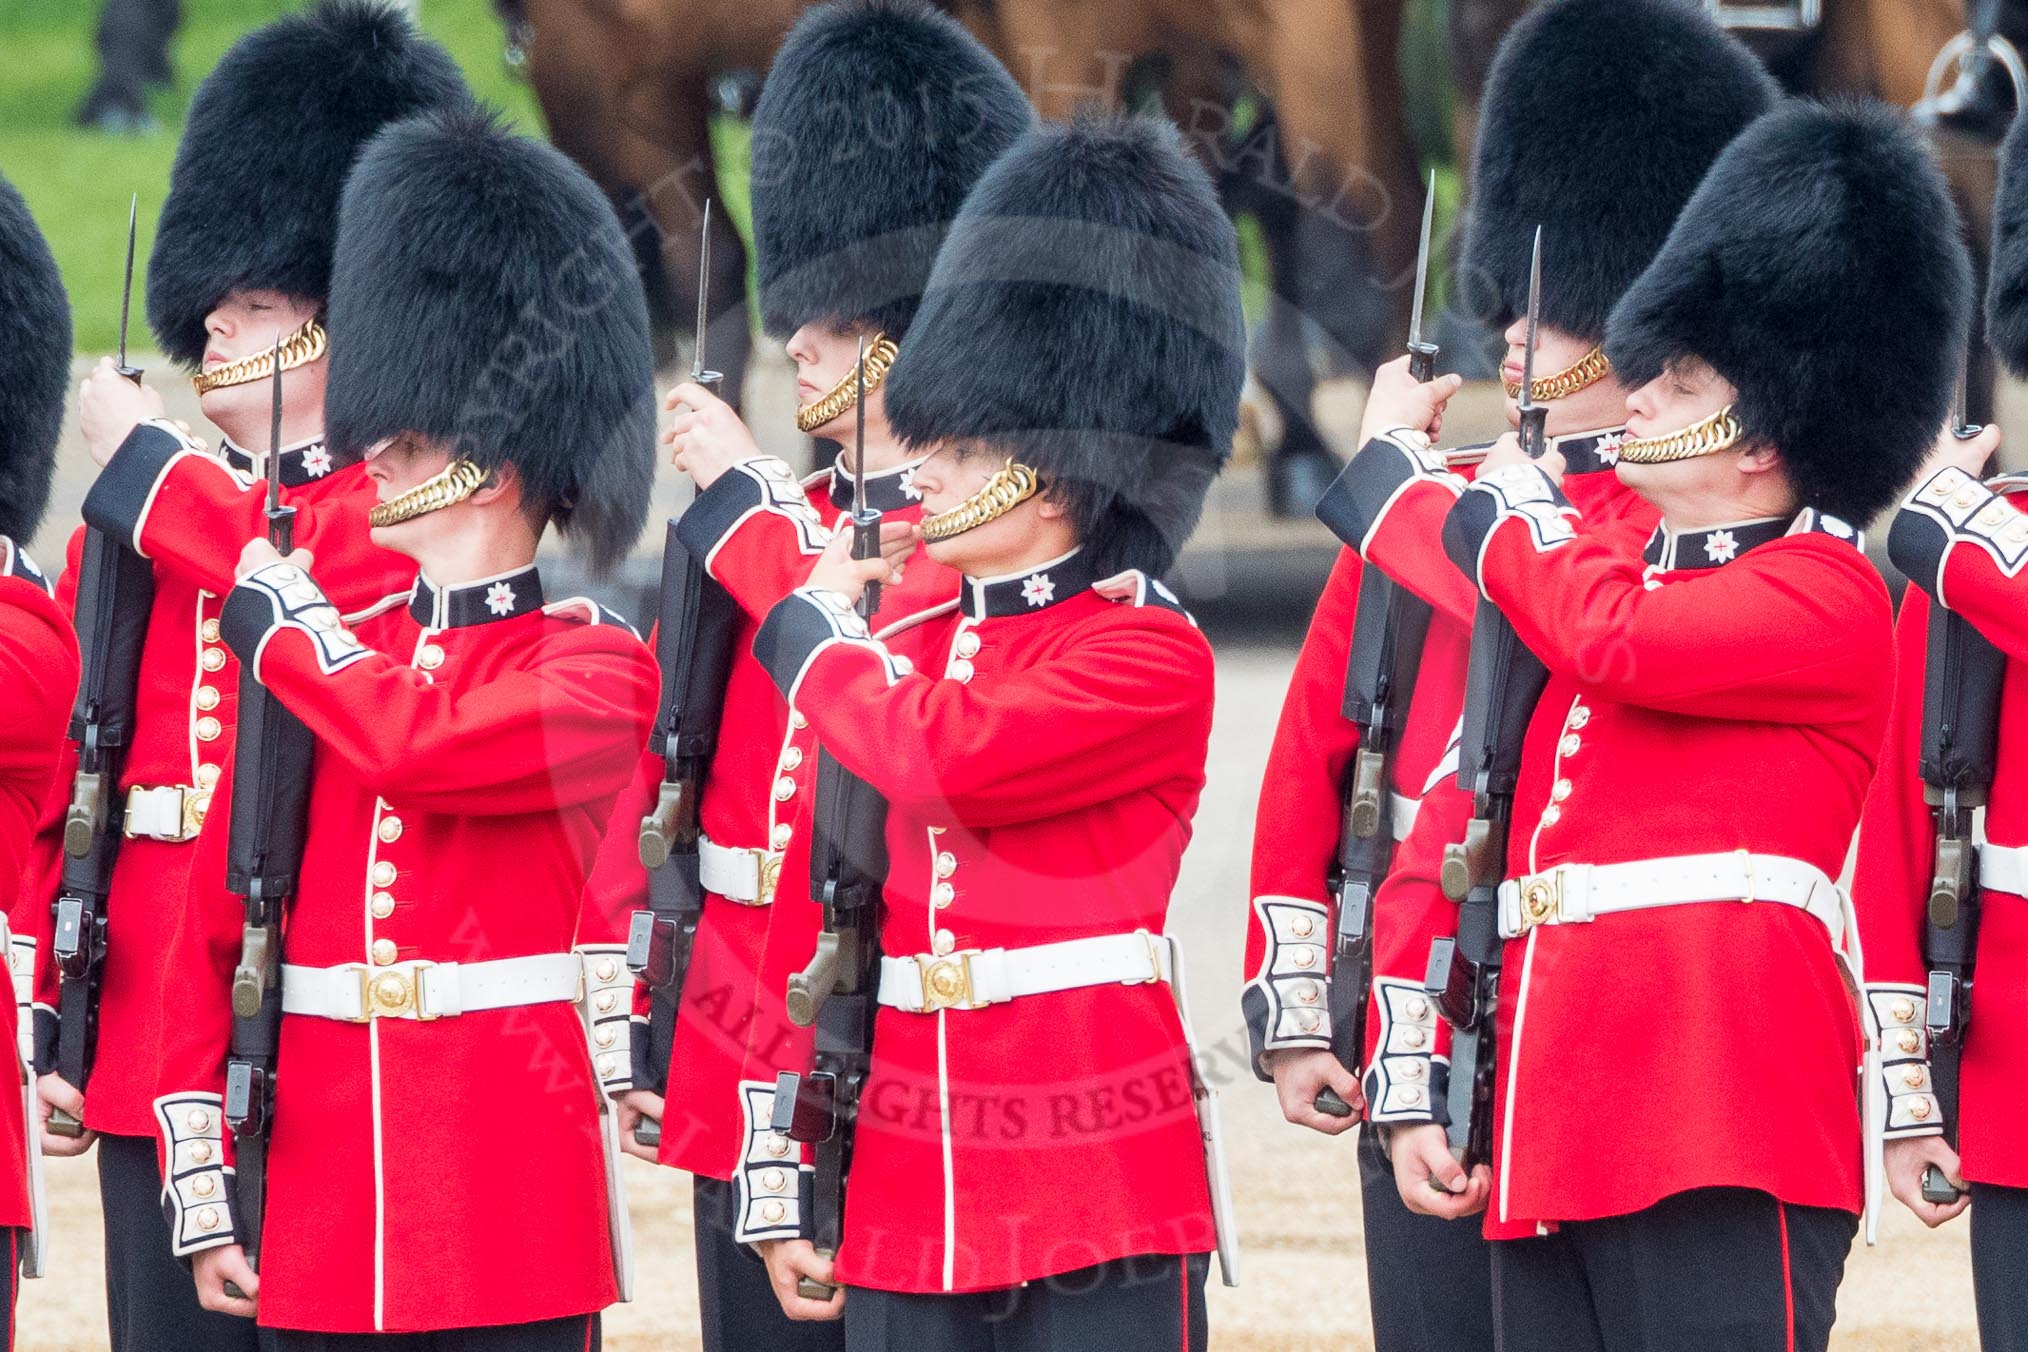 Trooping the Colour 2016.
Horse Guards Parade, Westminster,
London SW1A,
London,
United Kingdom,
on 11 June 2016 at 10:43, image #211